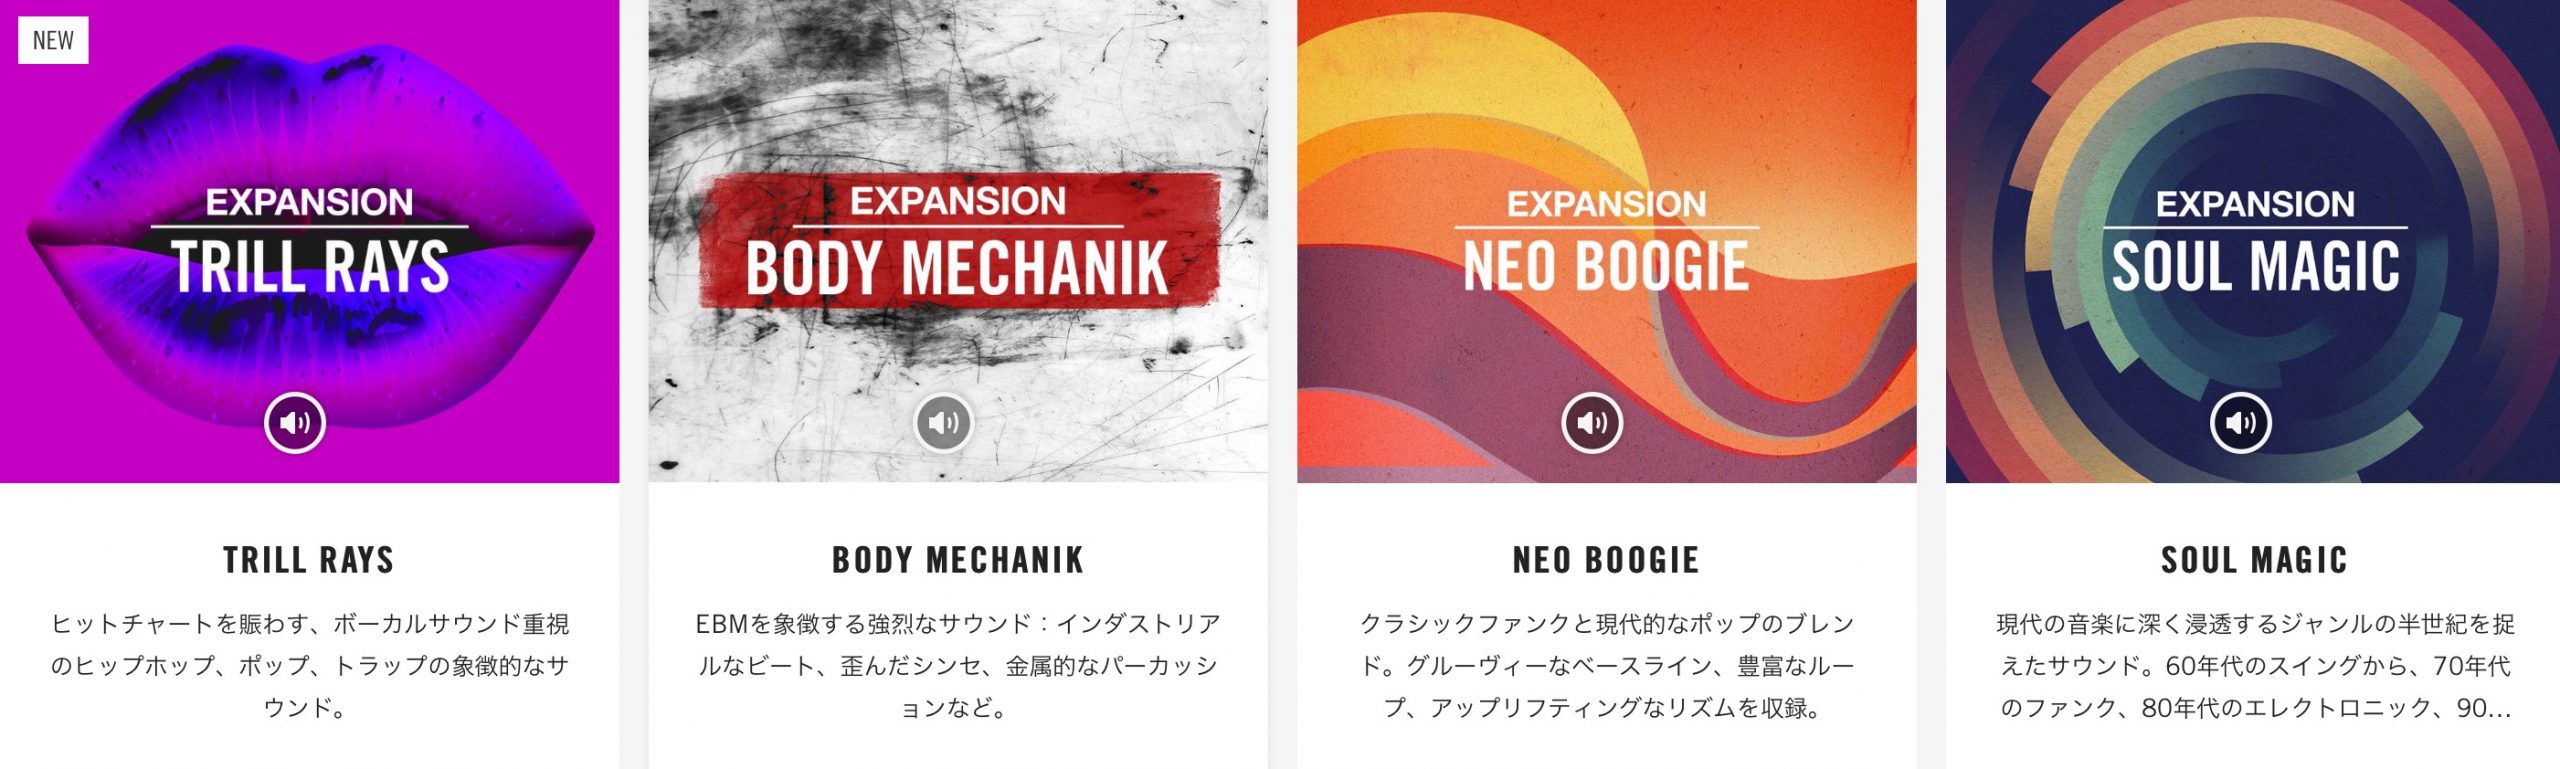 Native Instruments「Expansions」の概要・使い方